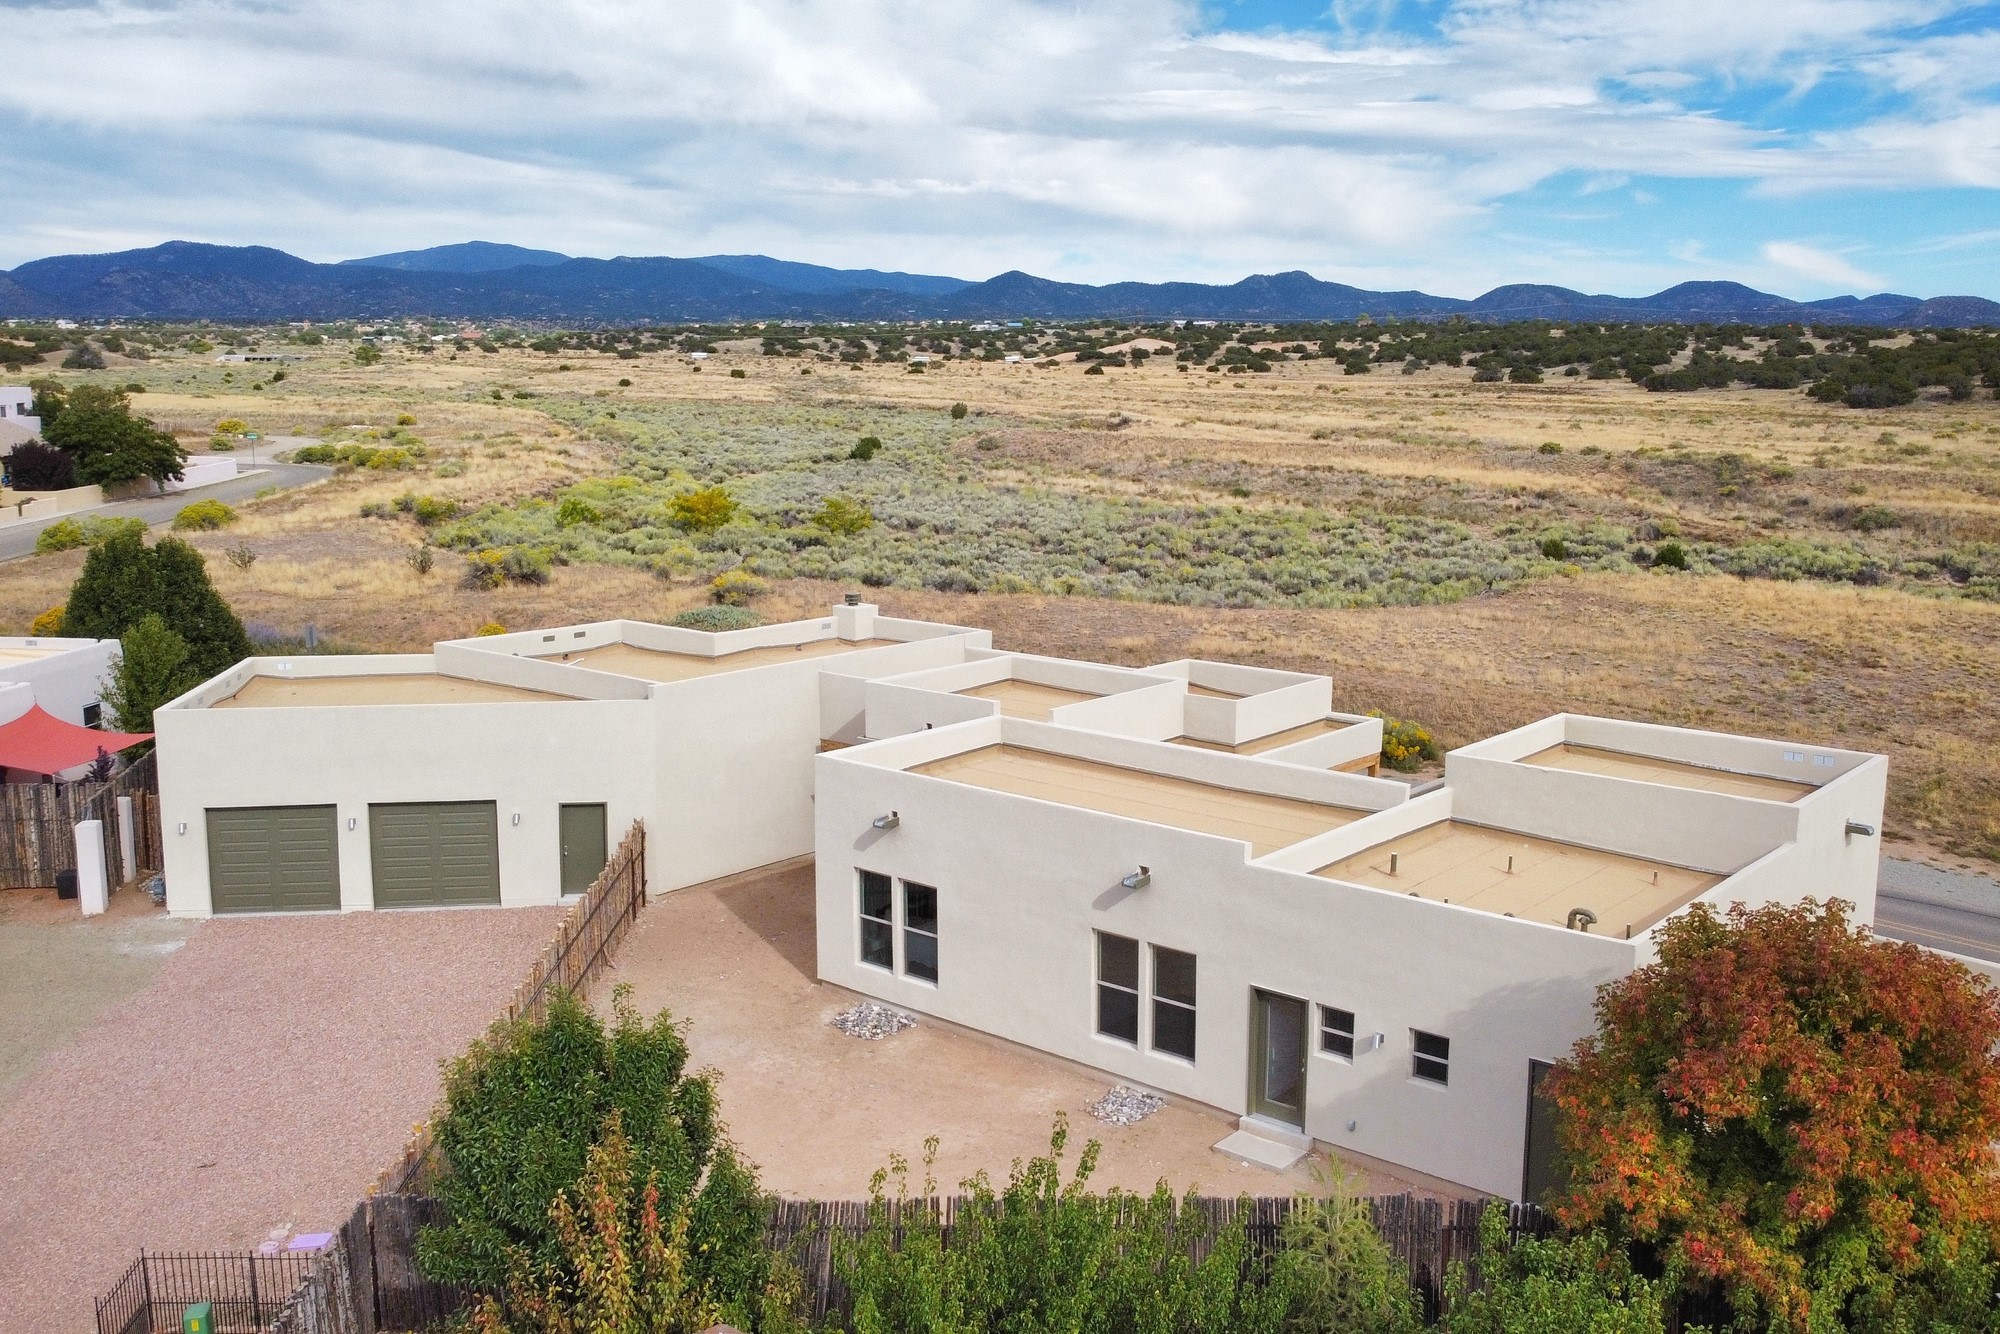 39 Willow Back, Santa Fe, New Mexico 87508, 3 Bedrooms Bedrooms, ,3 BathroomsBathrooms,Residential,For Sale,39 Willow Back,202335241